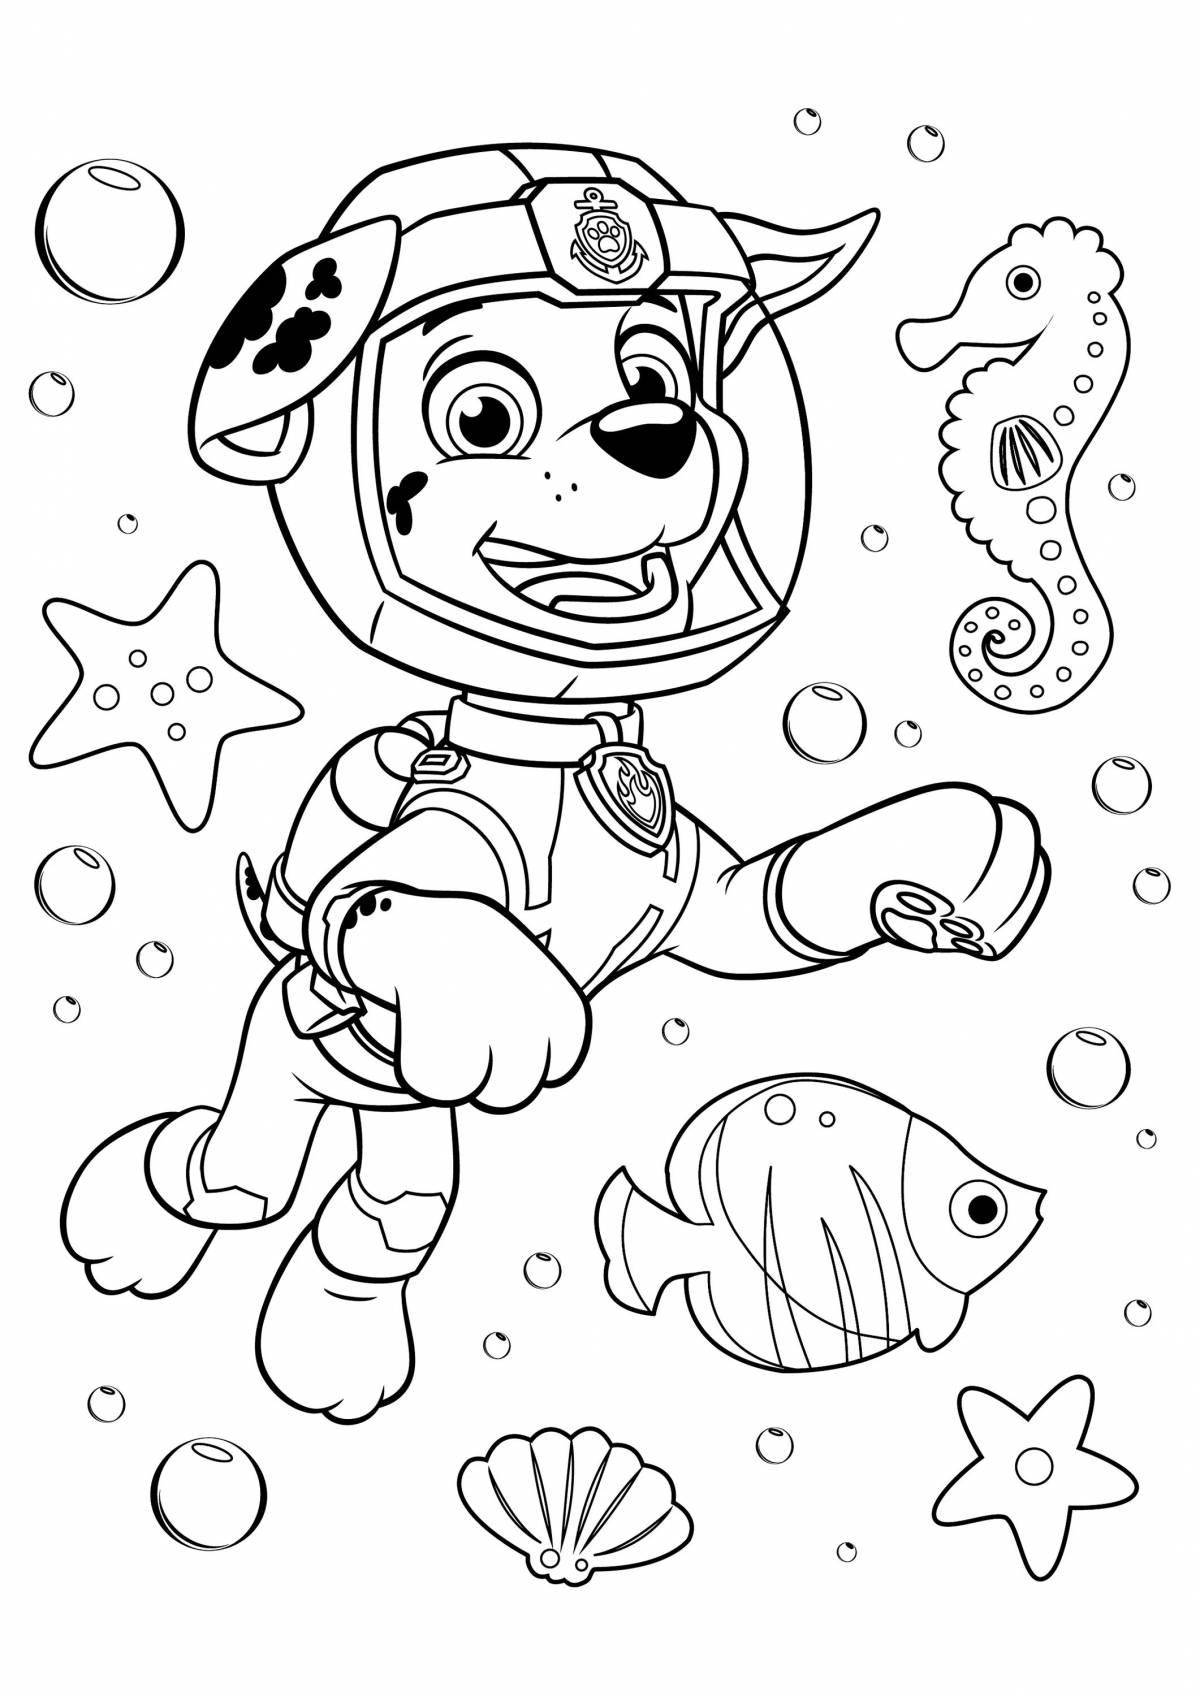 Awesome Paw Patrol coloring book